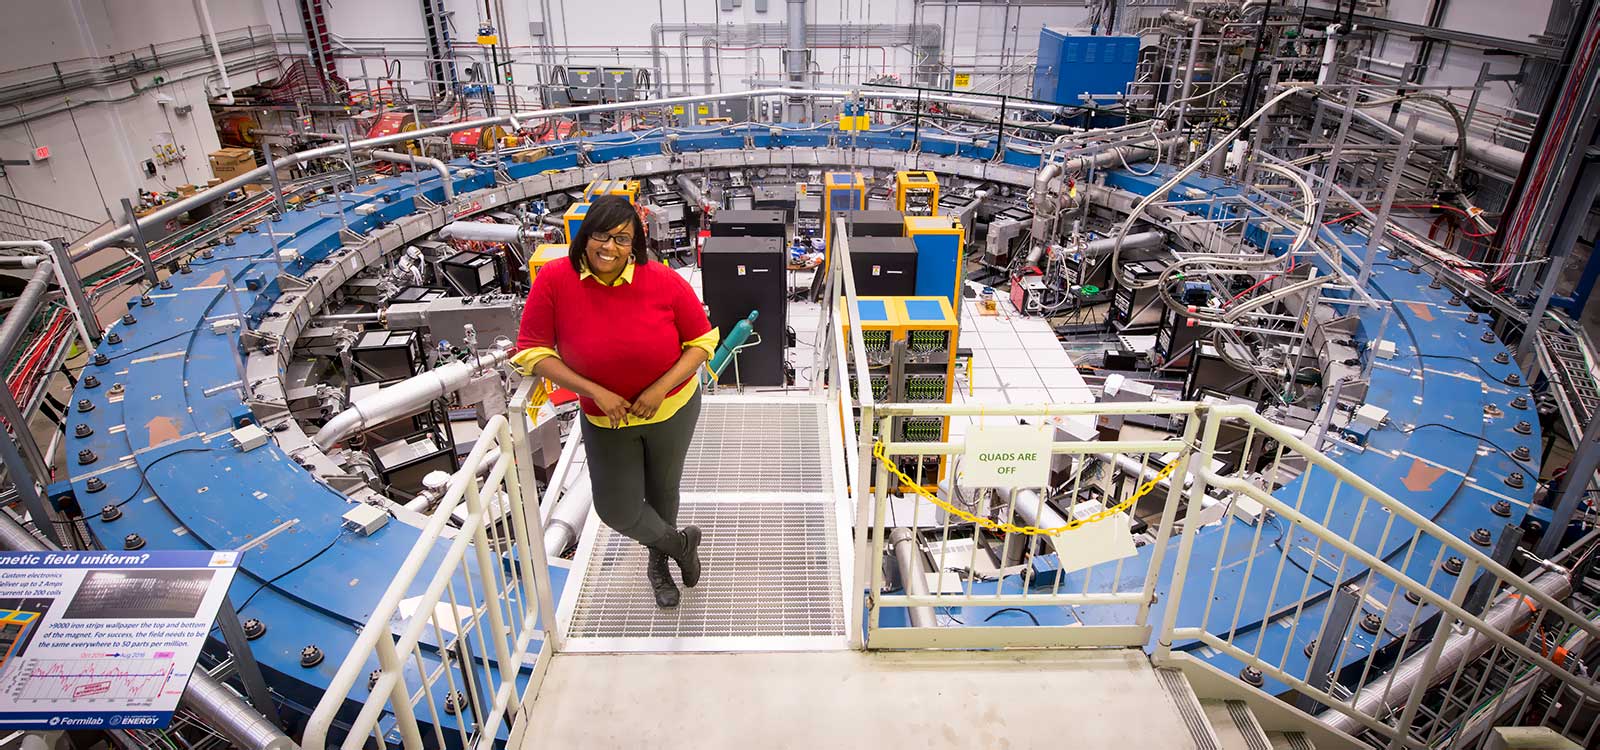 photo of woman in front of muon storage ring